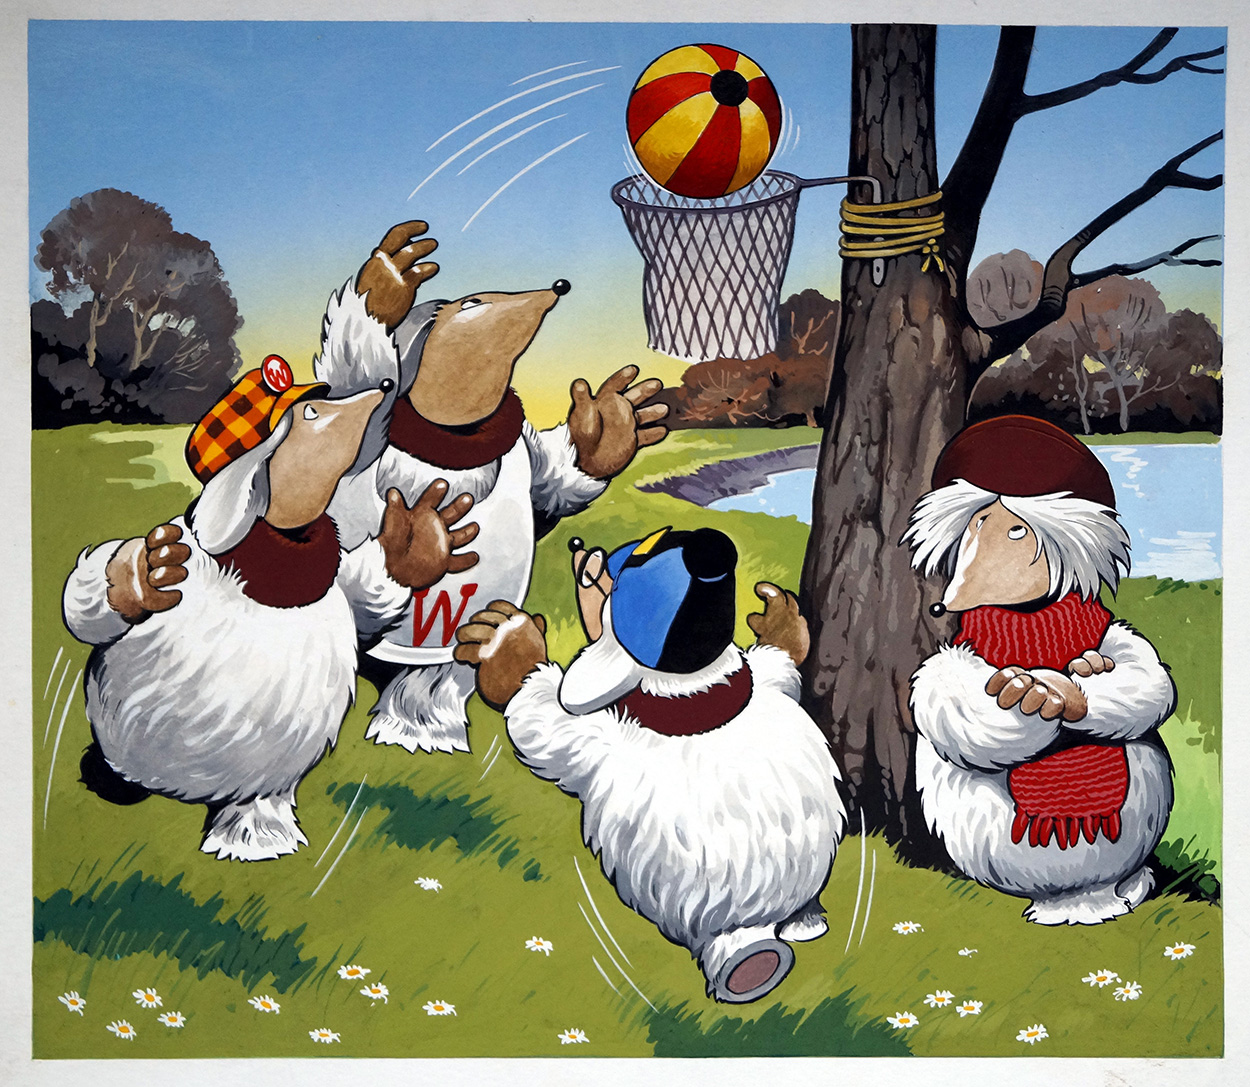 The Wombles: Netball (TWO pages) (Originals) art by The Wombles (Blasco) at The Illustration Art Gallery